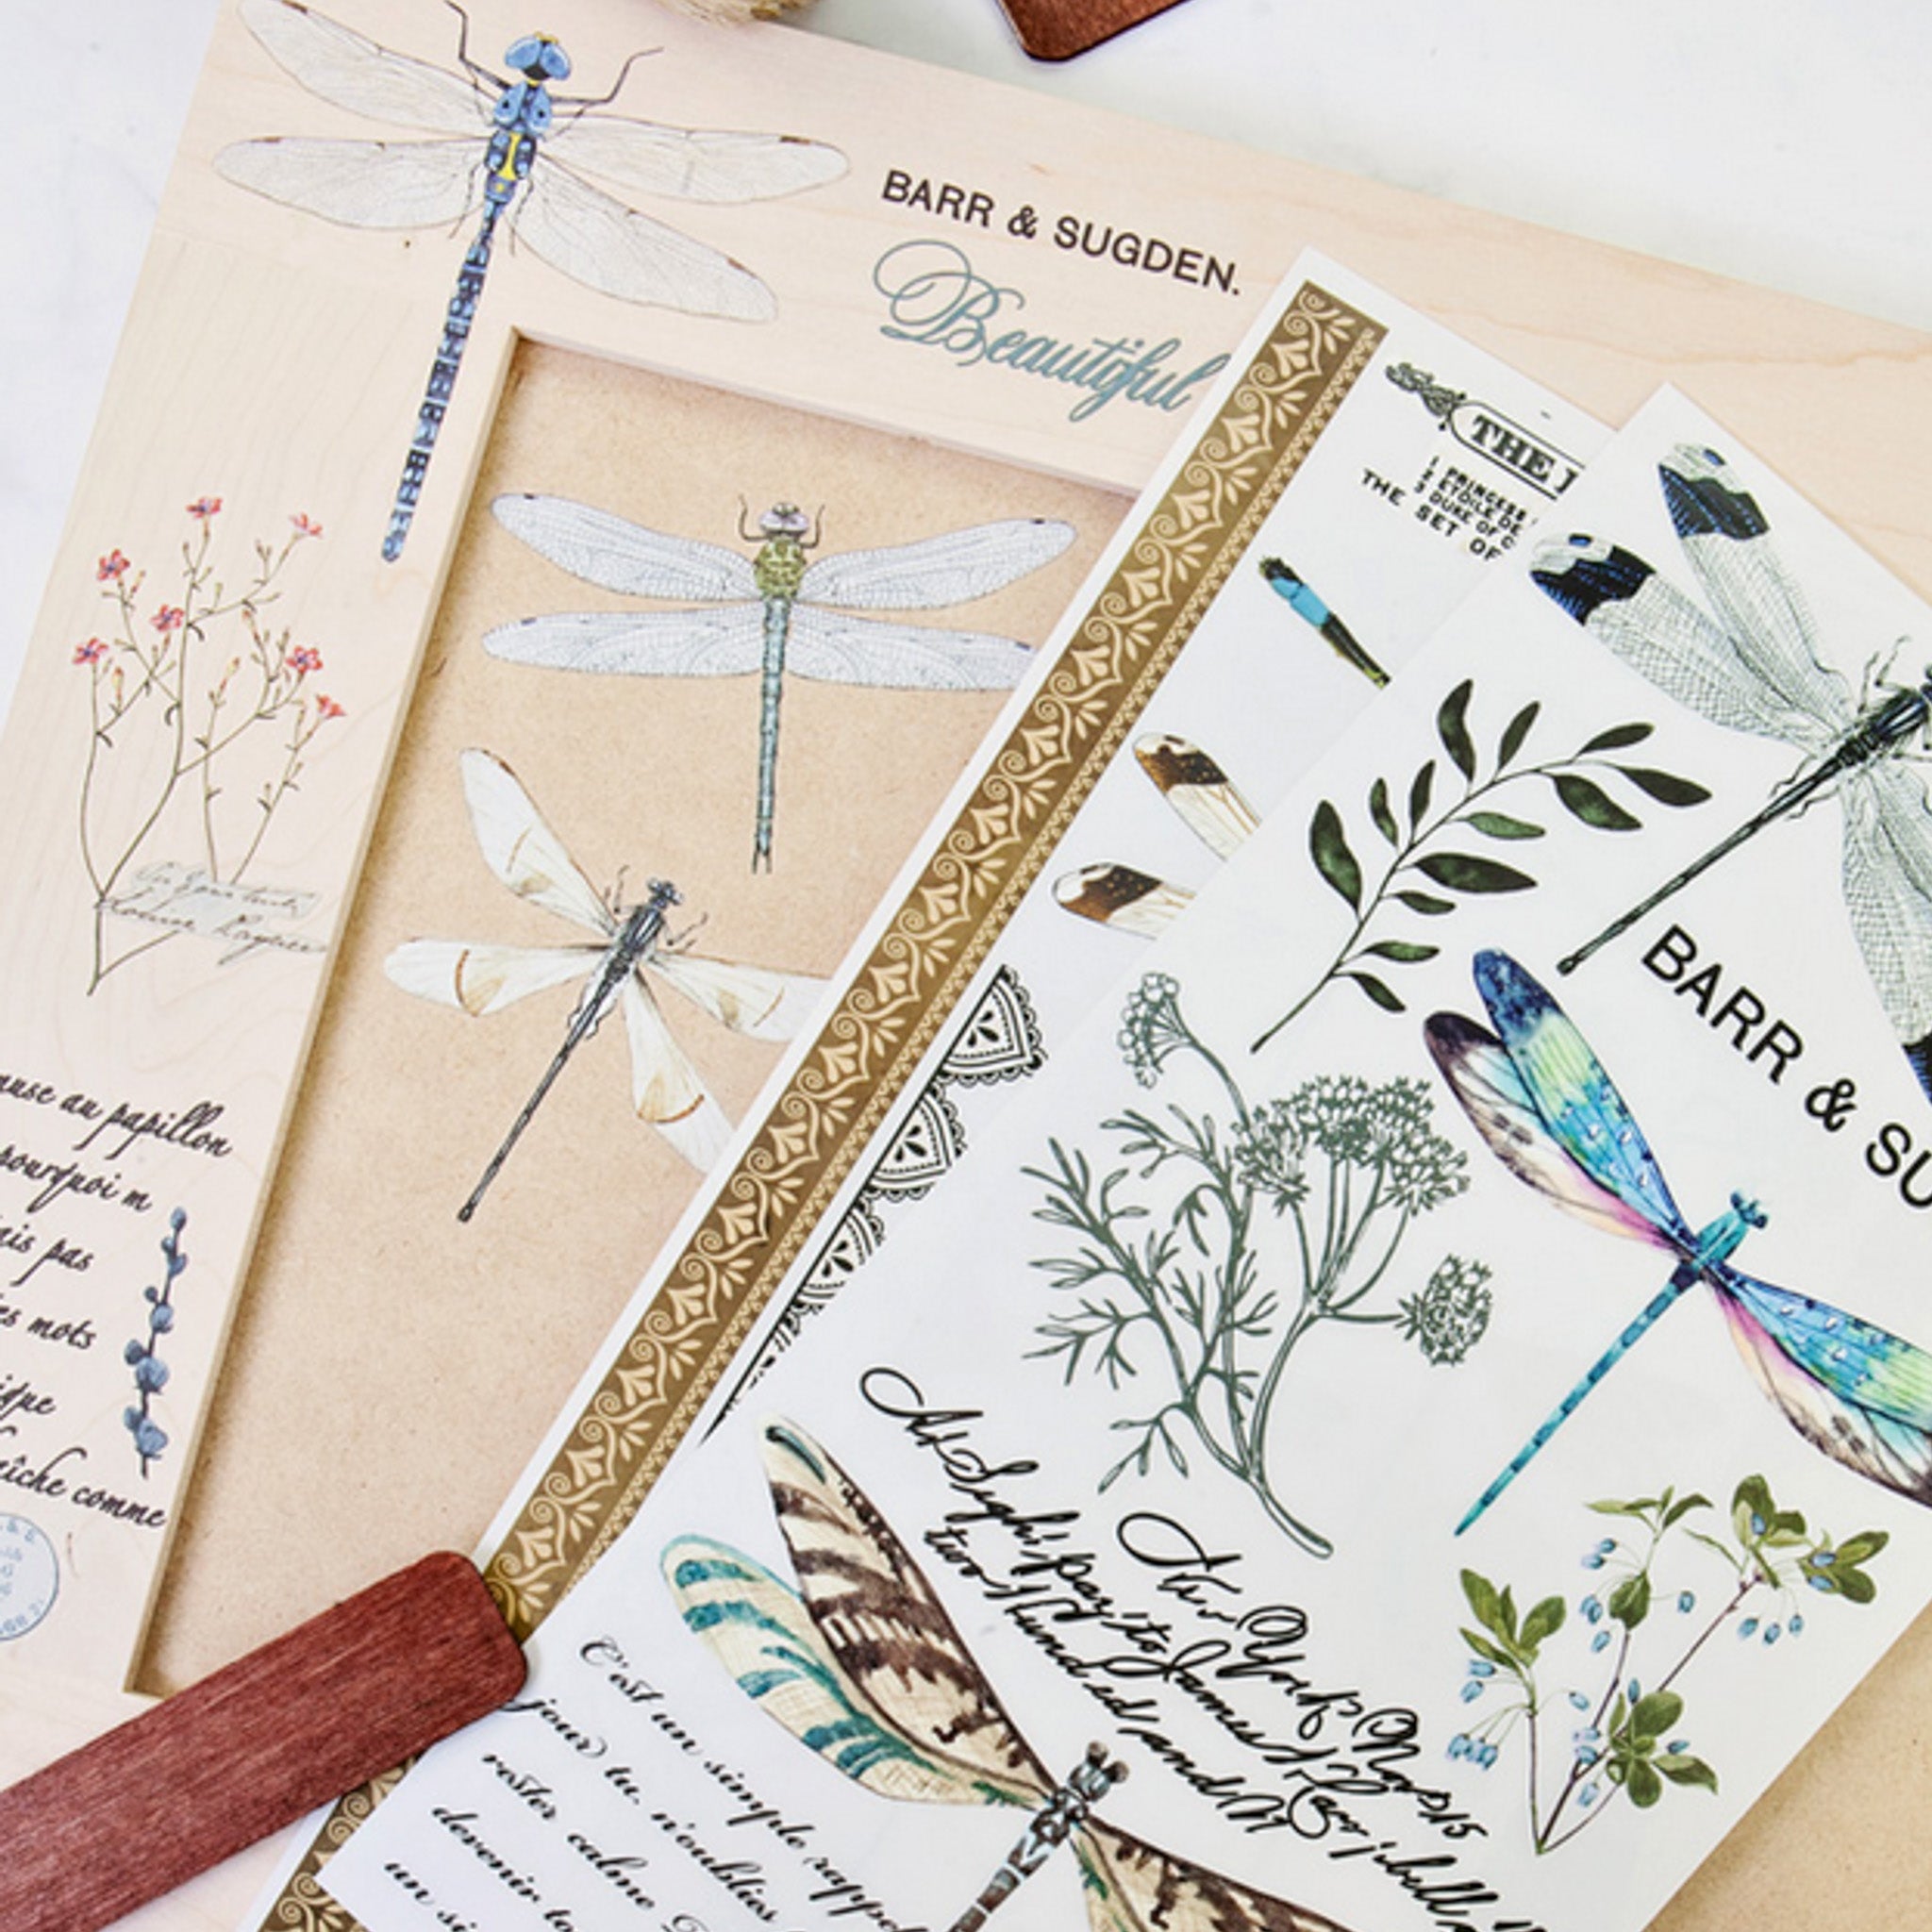 A small wood photo project features ReDesign with Prima's Spring Dragonfly small transfer on it. Two sheets of the transfers sit on the craft project.